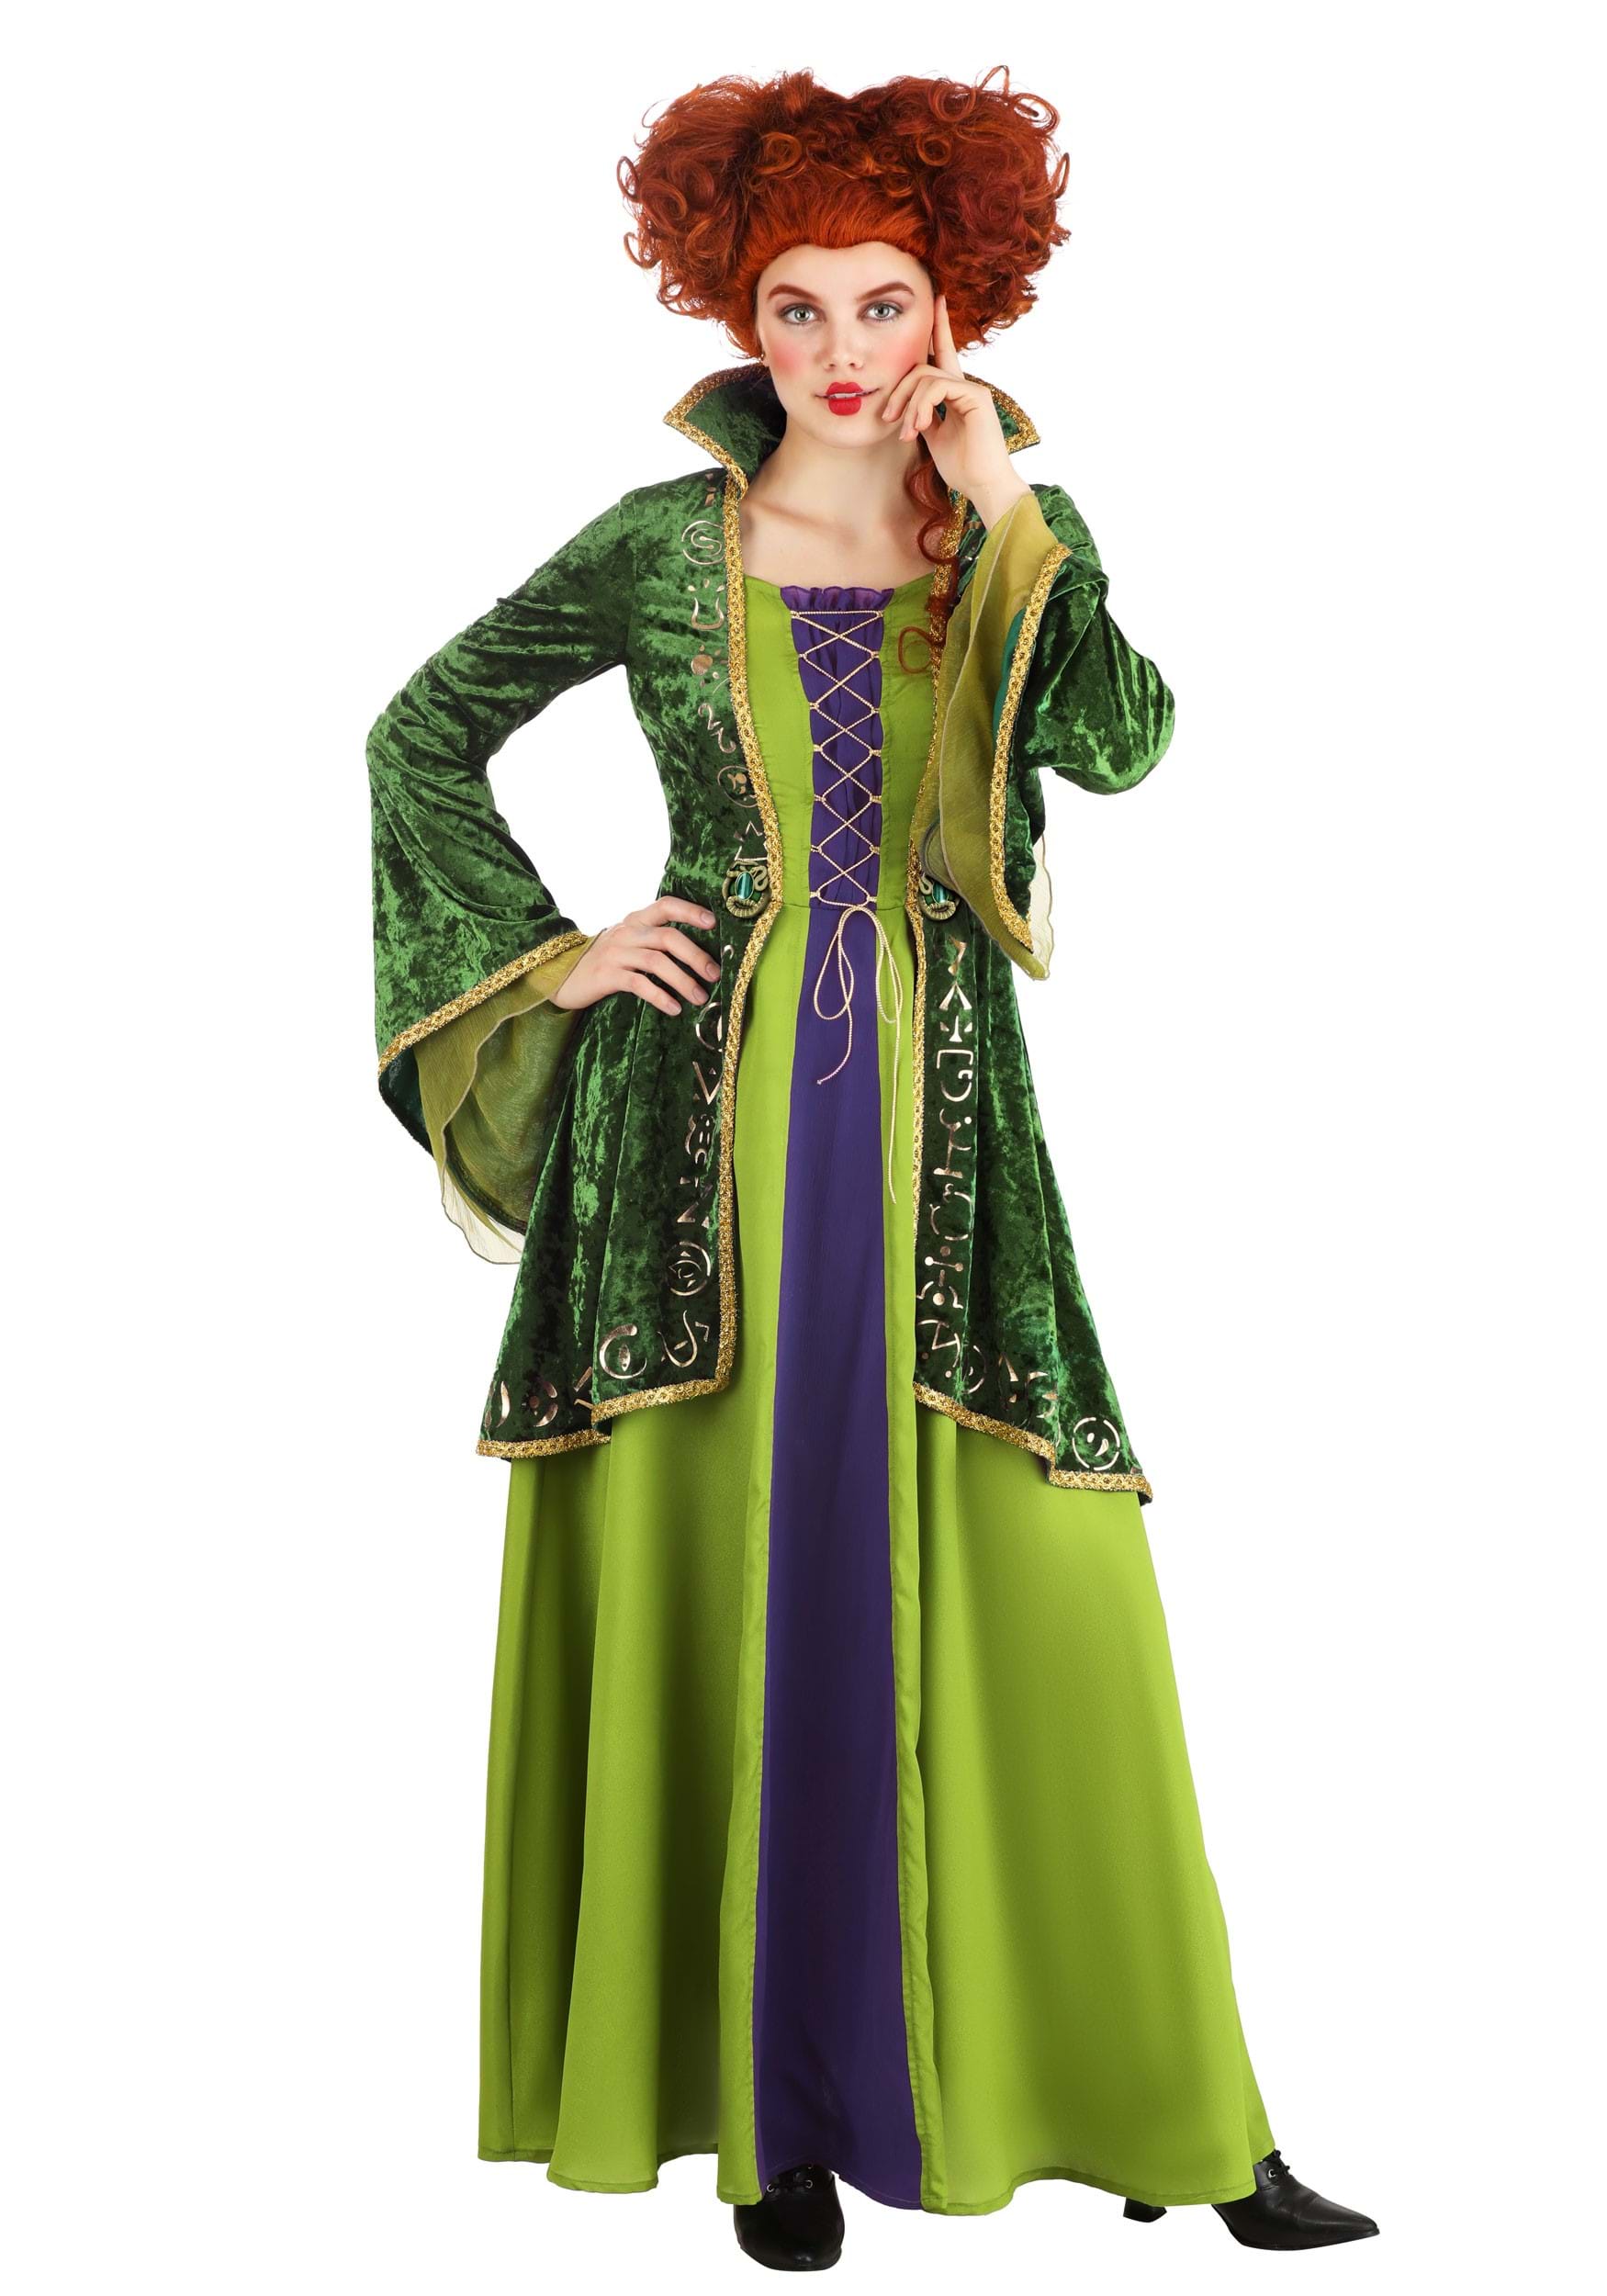 Image of Adult Deluxe Disney Winifred Sanderson Costume ID FUN4728AD-XL